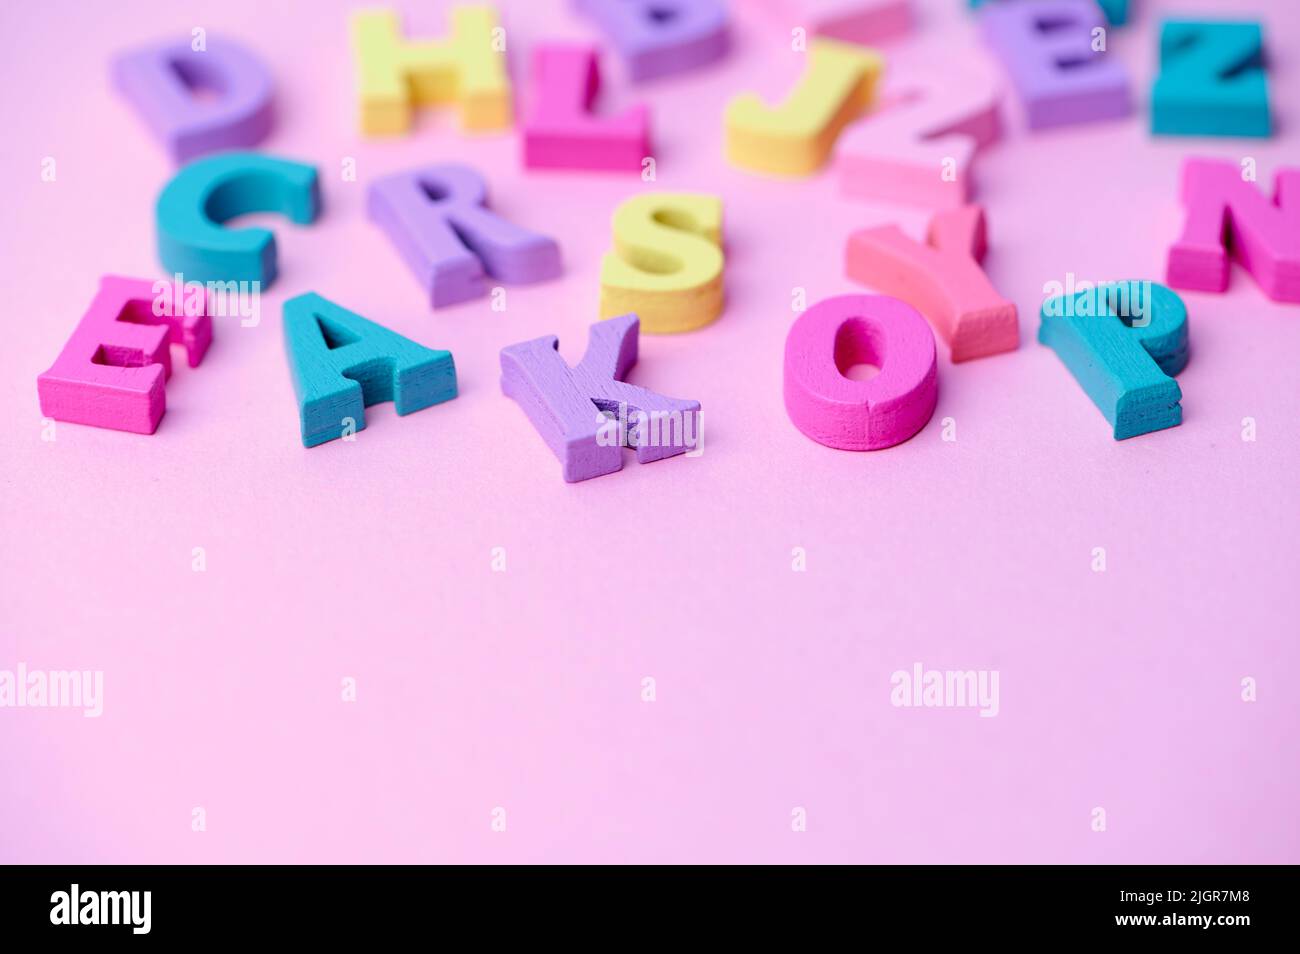 several colored wooden letters on pink background Stock Photo